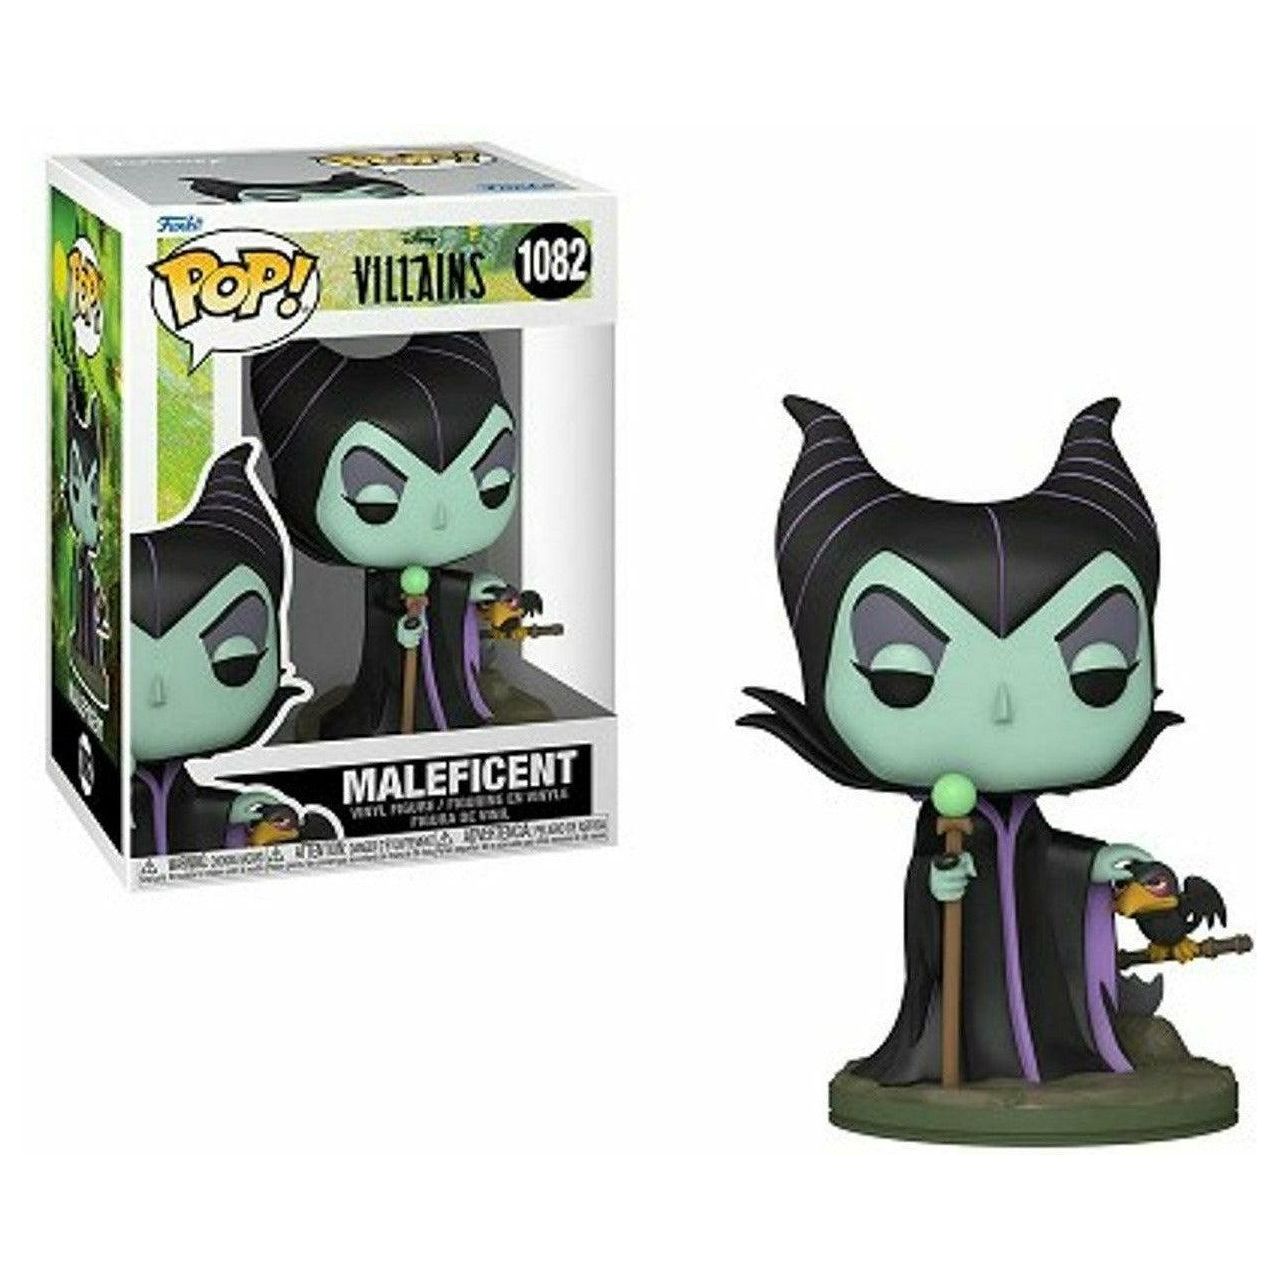 Funko Pop Disney Villains - Maleficent - BumbleToys - 18+, 4+ Years, 5-7 Years, Action Figures, Characters, Funko, Girls, Pre-Order